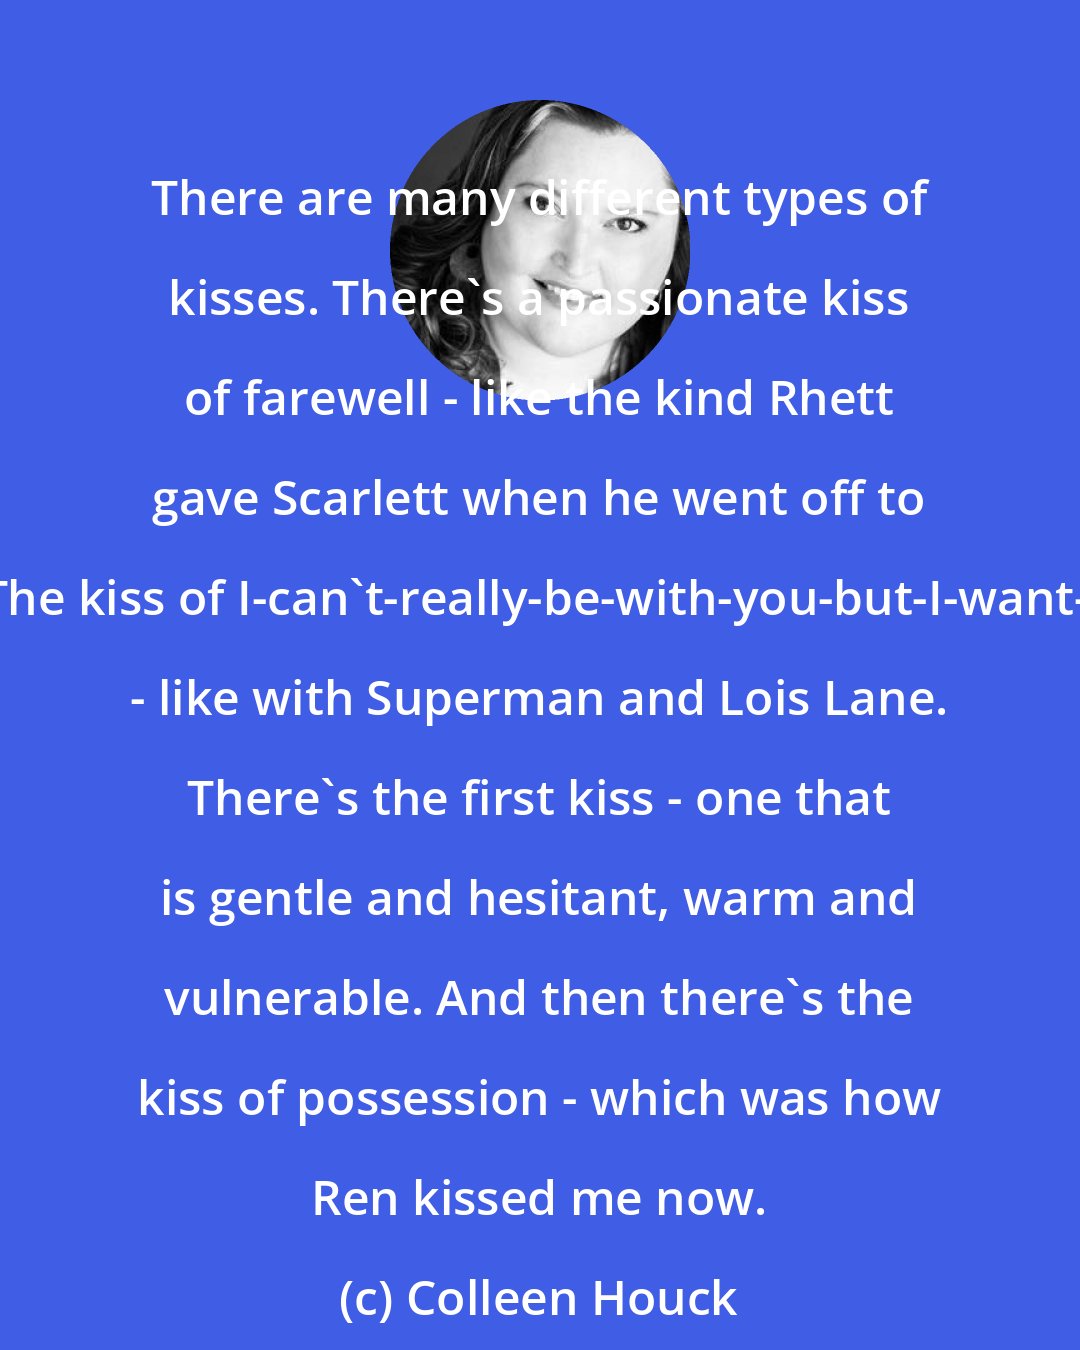 Colleen Houck: There are many different types of kisses. There's a passionate kiss of farewell - like the kind Rhett gave Scarlett when he went off to war. The kiss of I-can't-really-be-with-you-but-I-want-to-be - like with Superman and Lois Lane. There's the first kiss - one that is gentle and hesitant, warm and vulnerable. And then there's the kiss of possession - which was how Ren kissed me now.